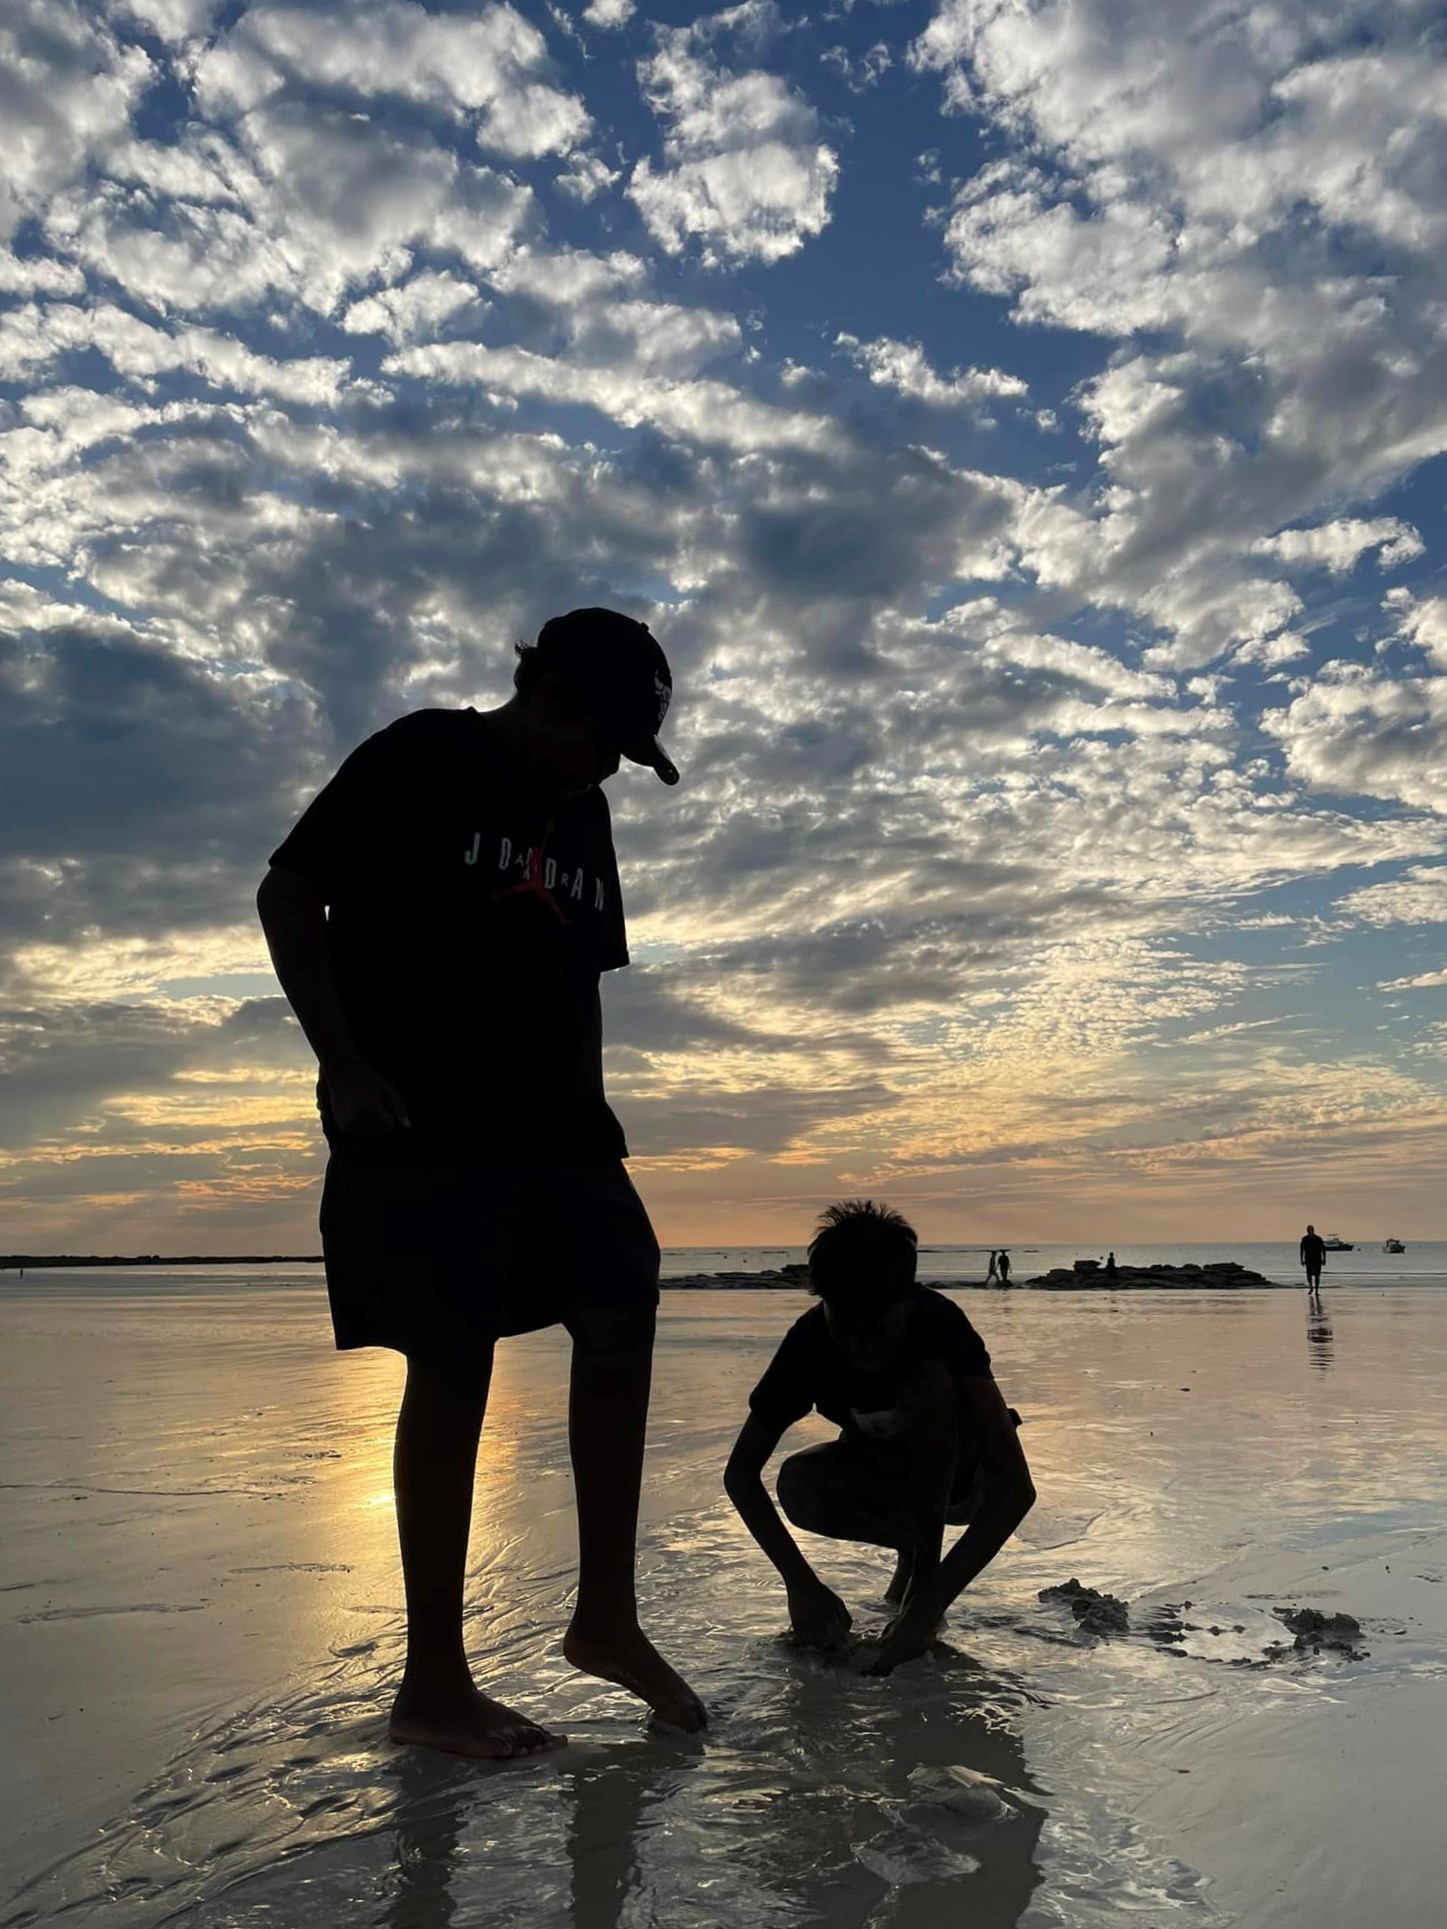 Students on a sunset beach in Broome